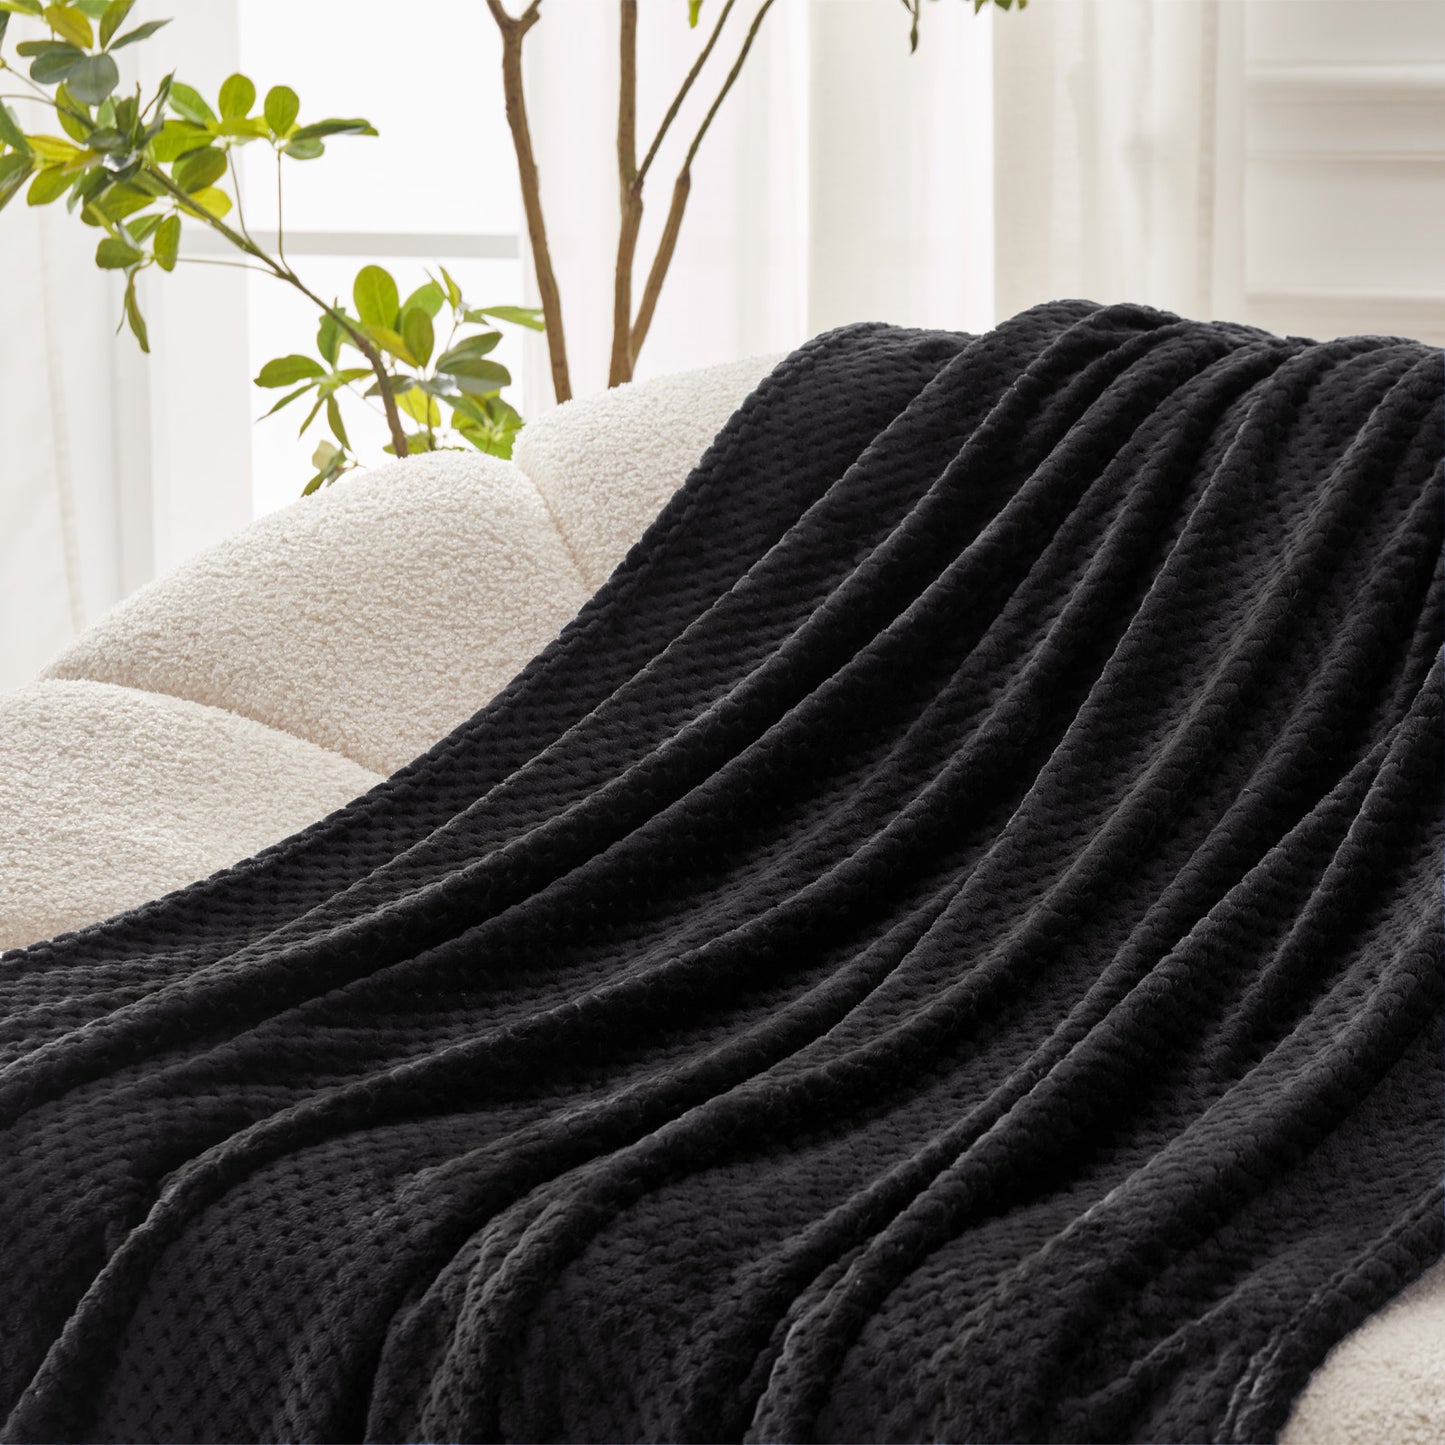 Exclusivo Mezcla Waffle Textured Extra Large Fleece Blanket, Super Soft and Warm Throw Blanket for Couch, Sofa and Bed (Black, 50x70 inches)-Cozy, Fuzzy and Lightweight